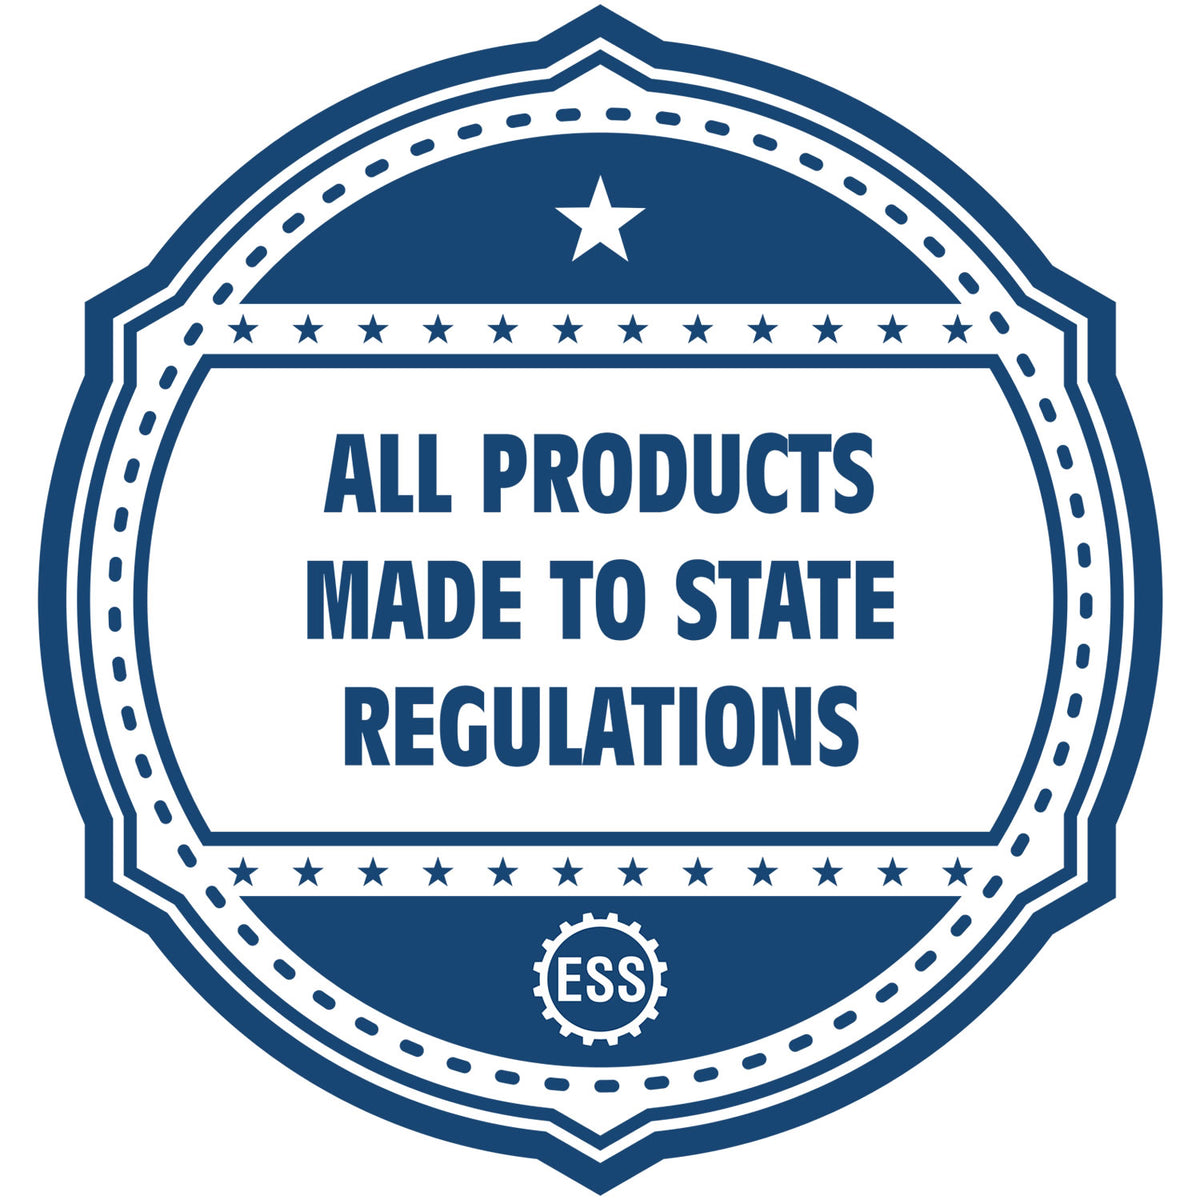 A blue icon or badge for the Gift Ohio Engineer Seal showing that this product is made in compliance with state regulations.